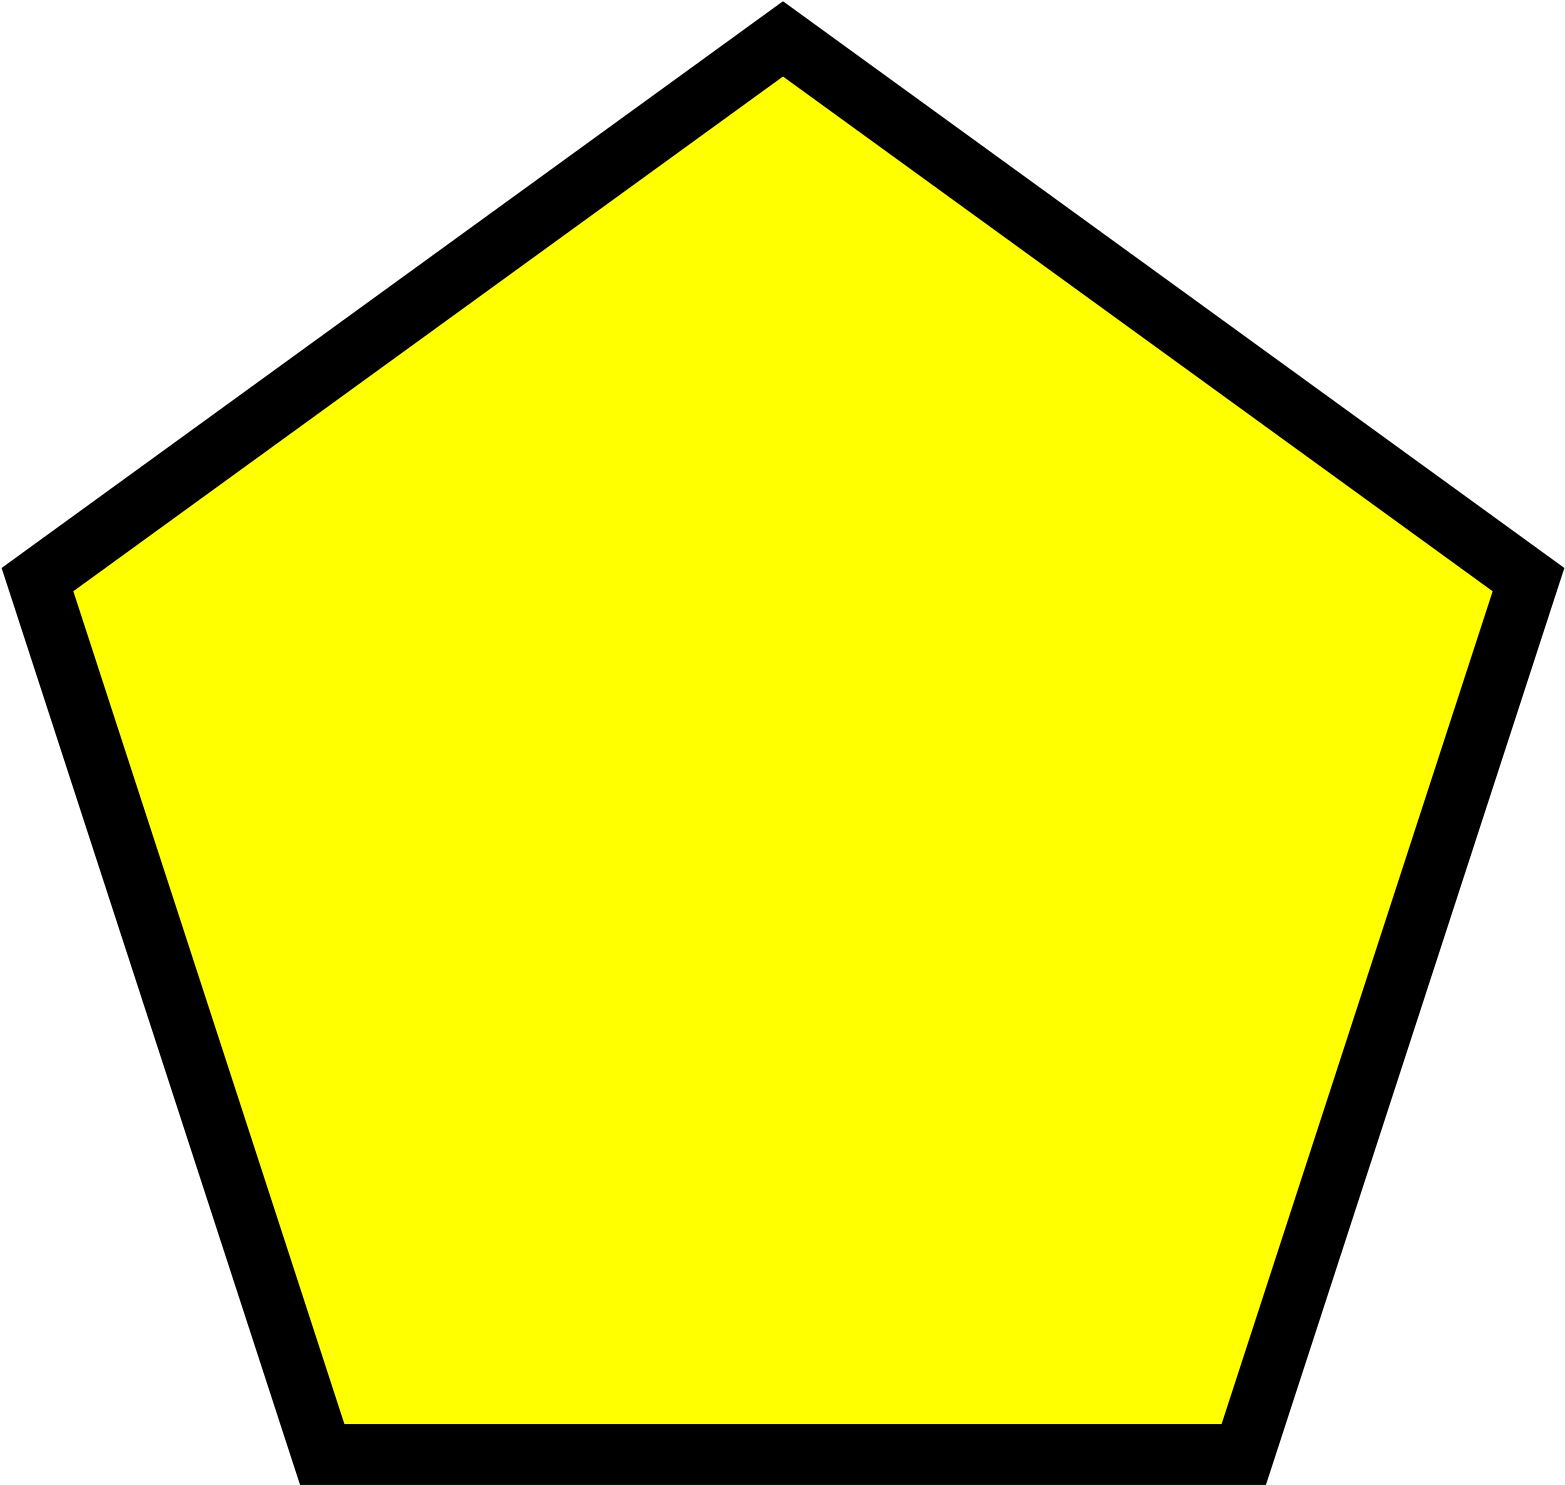 Open - Shape Has 5 Sides And 5 Angles (2000x2000)